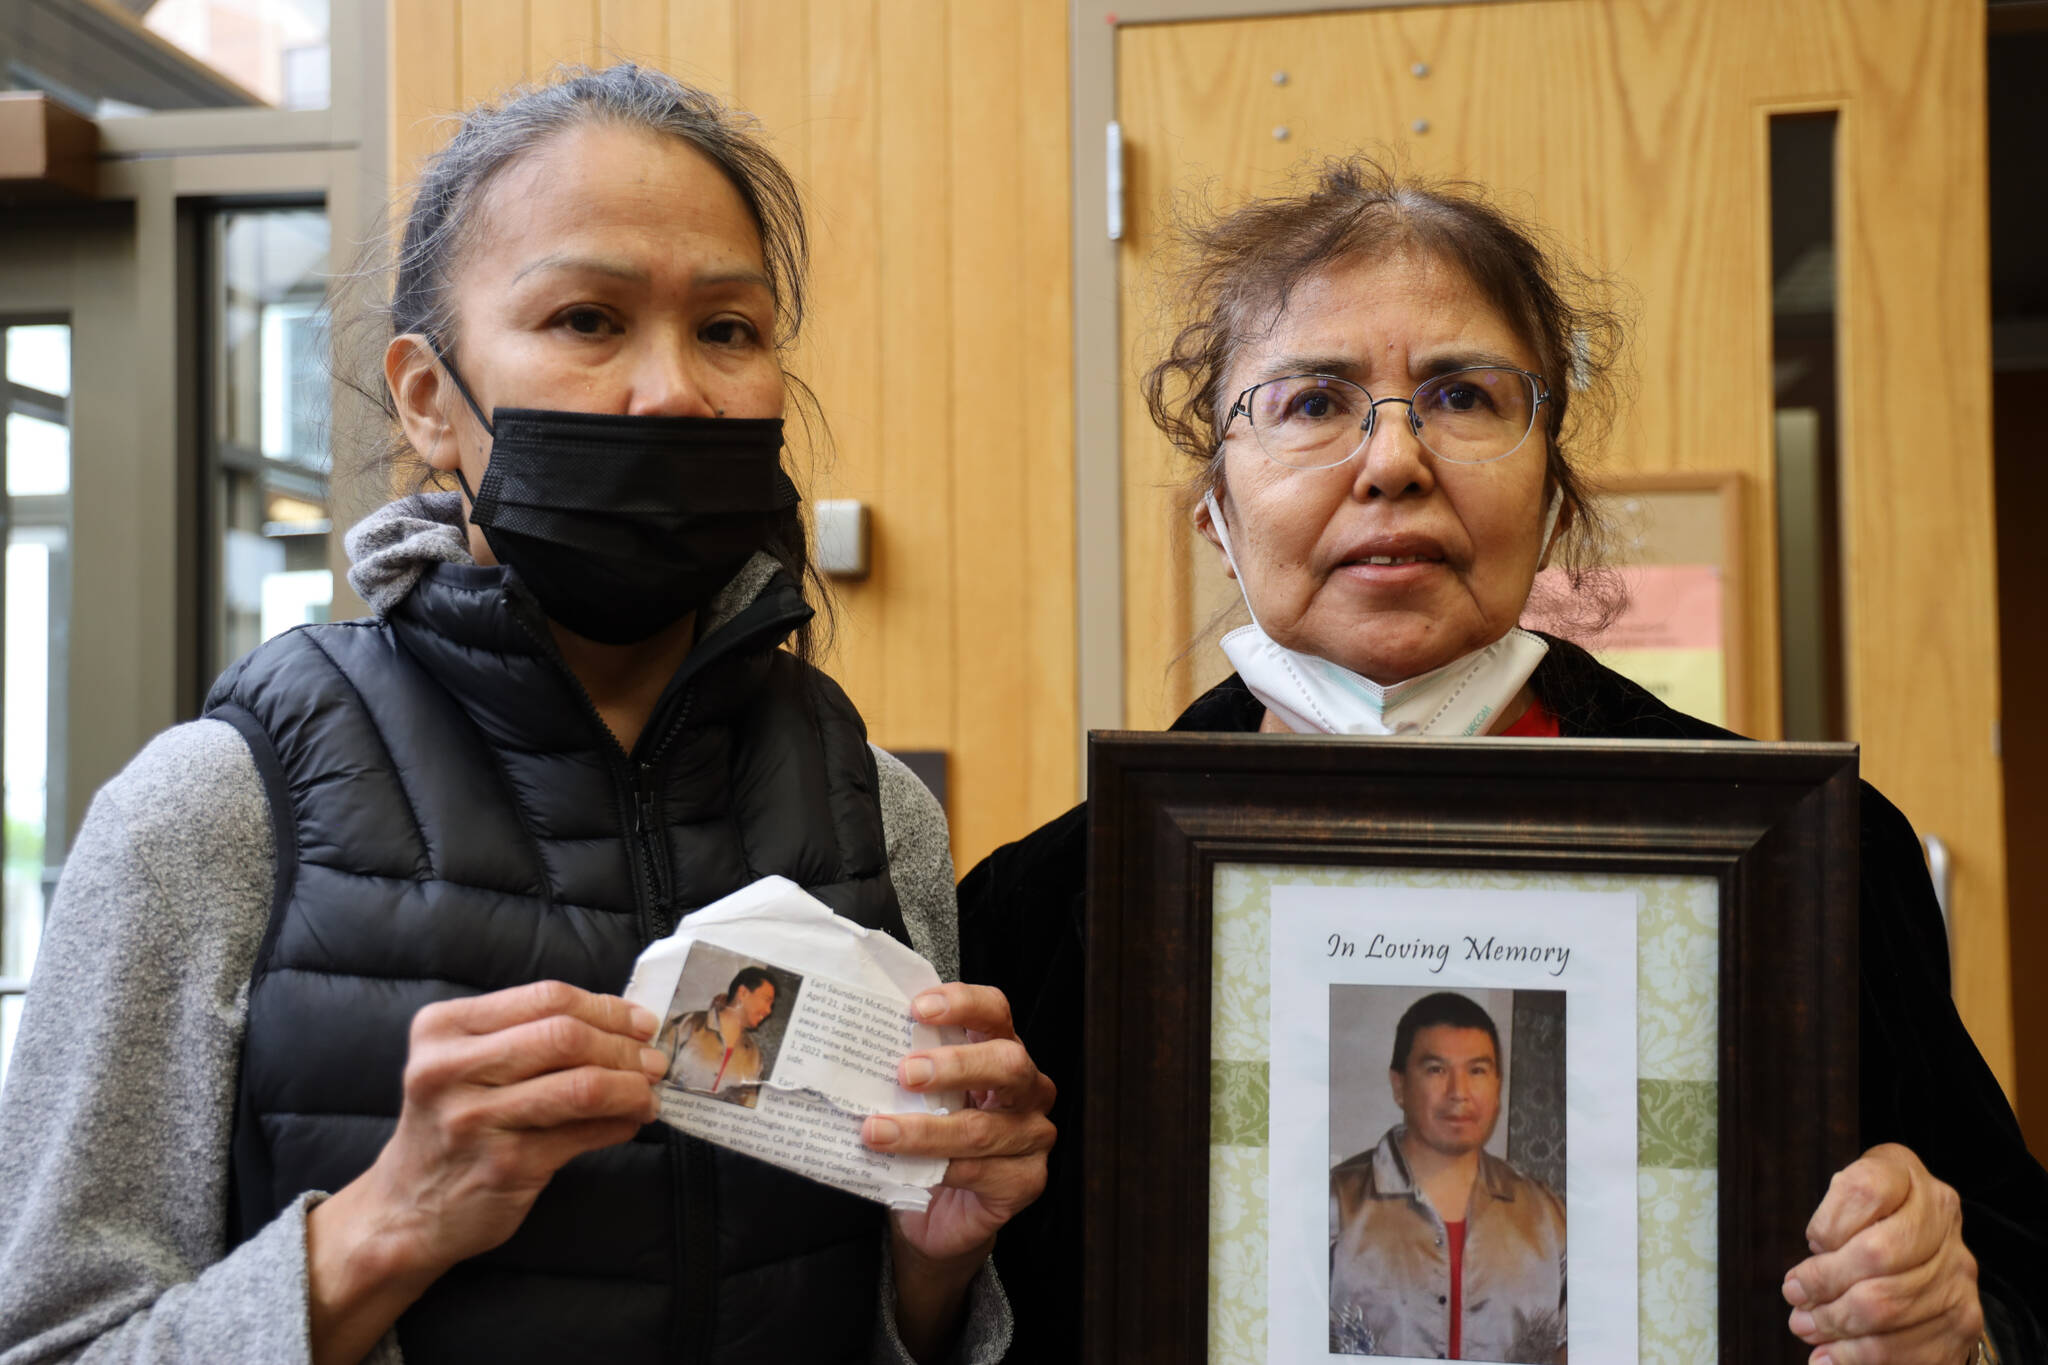 Lavina McKinley, left, and Mary Grant hold photos of their brother Saunders McKinley at the Juneau Courthouse on Wednesday morning. A readiness hearing was held for Tommy Floyd Bowers who has been accused of fatally pushing McKinley out an open second-story window at the Glory Hall in late February 2022. (Clarise Larson / Juneau Empire)